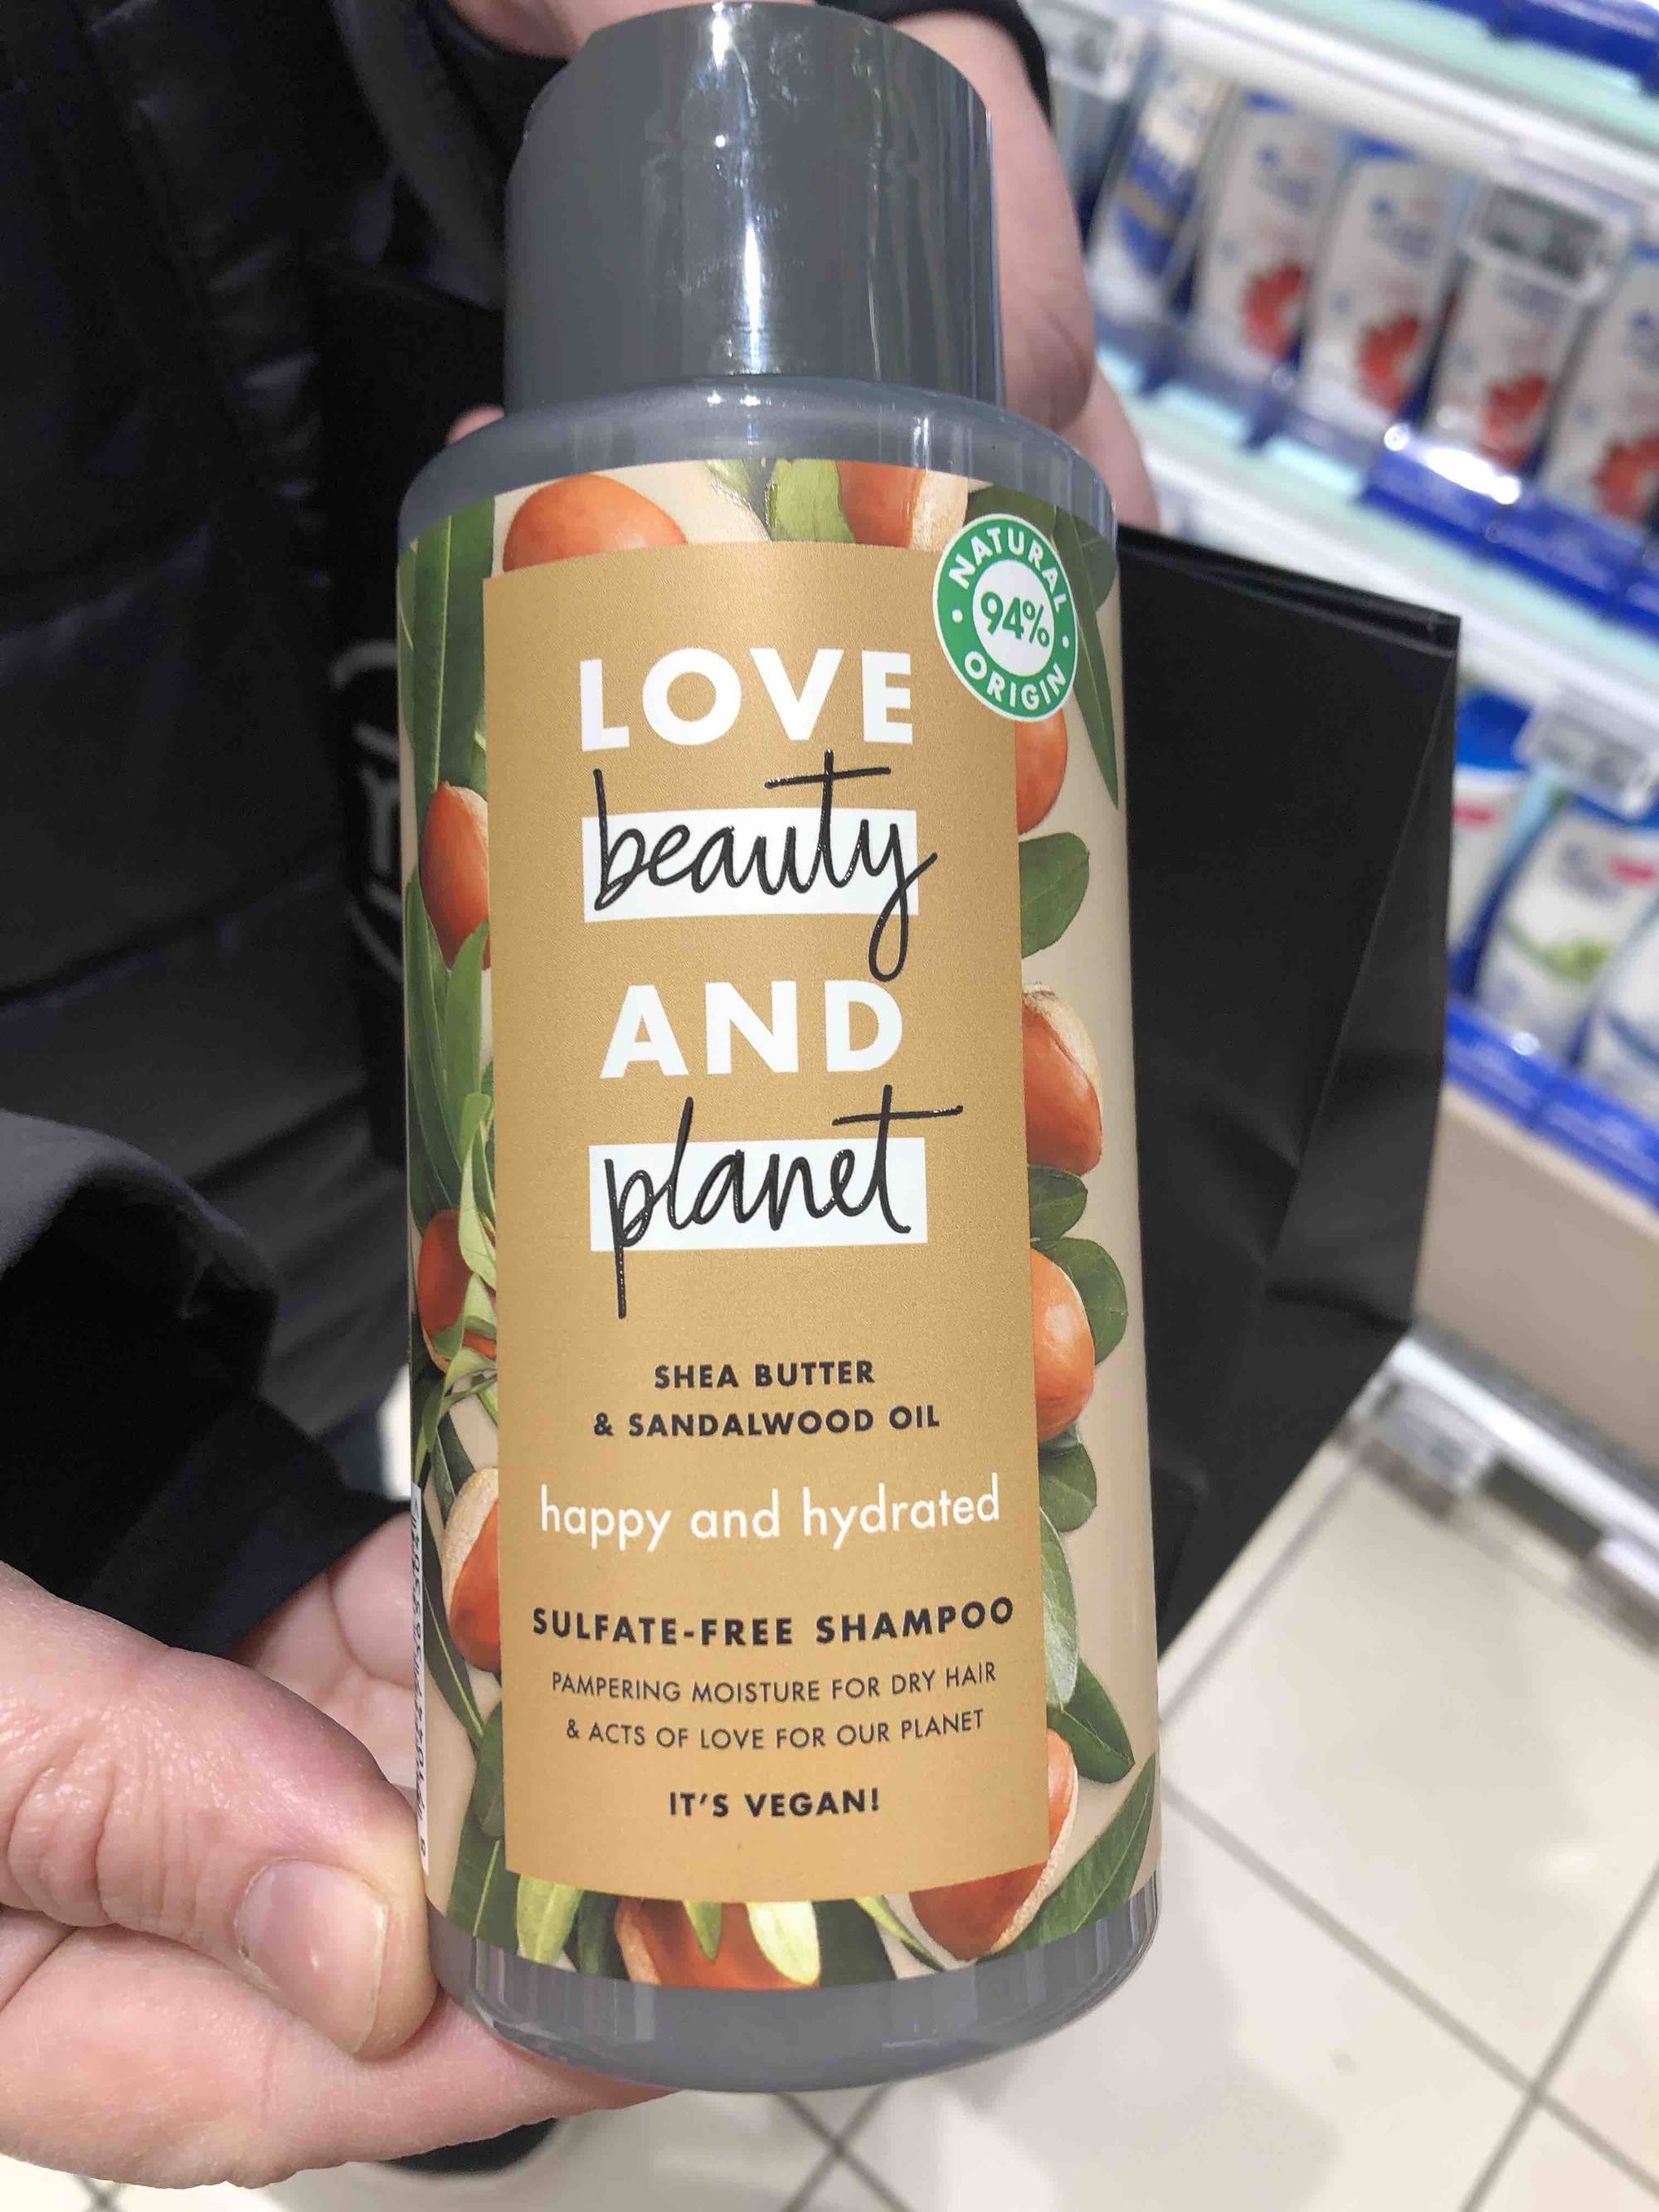 LOVE BEAUTY AND PLANET - Happy and hydrated - Sulfate-free shampoo